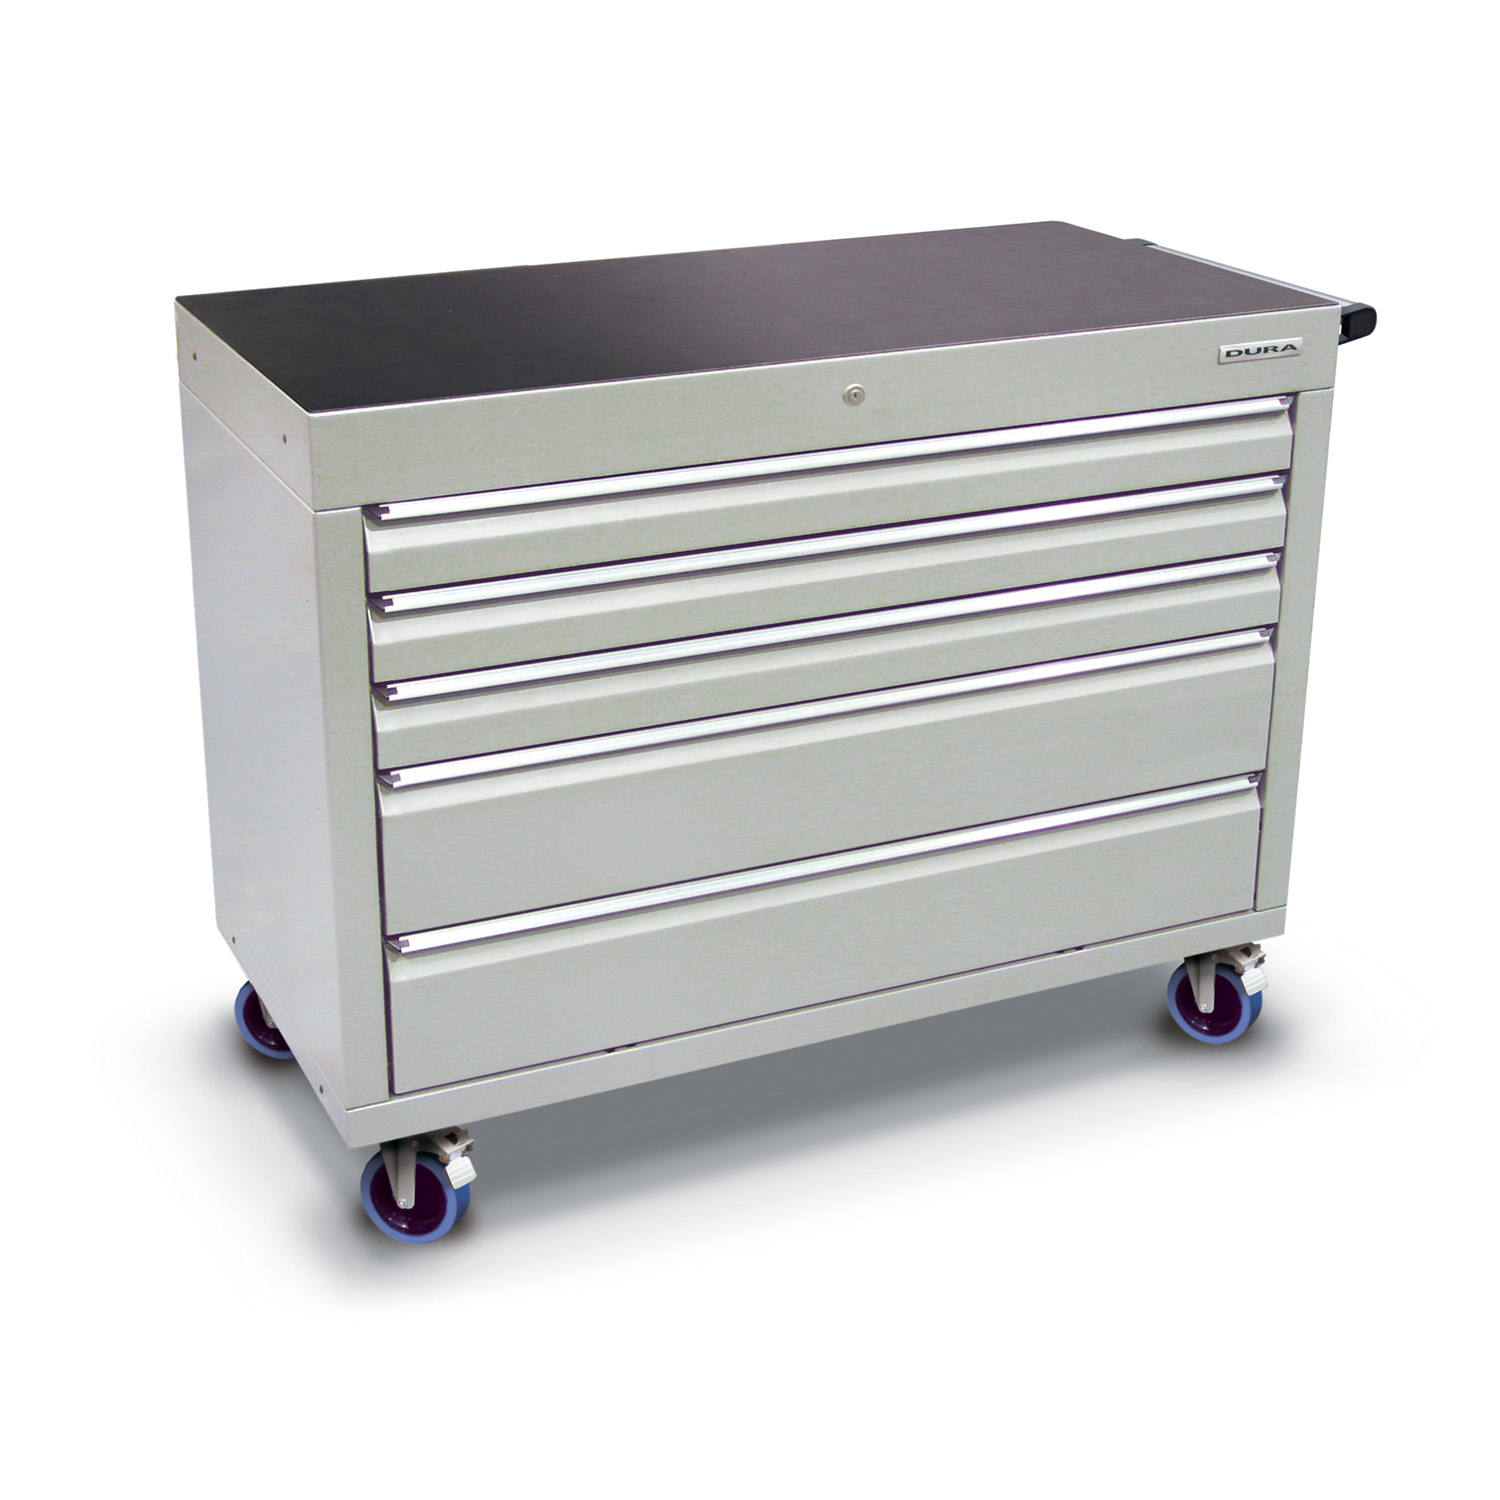 1200 series cabinet with 5 drawers (3 medium, 2 large) and castors